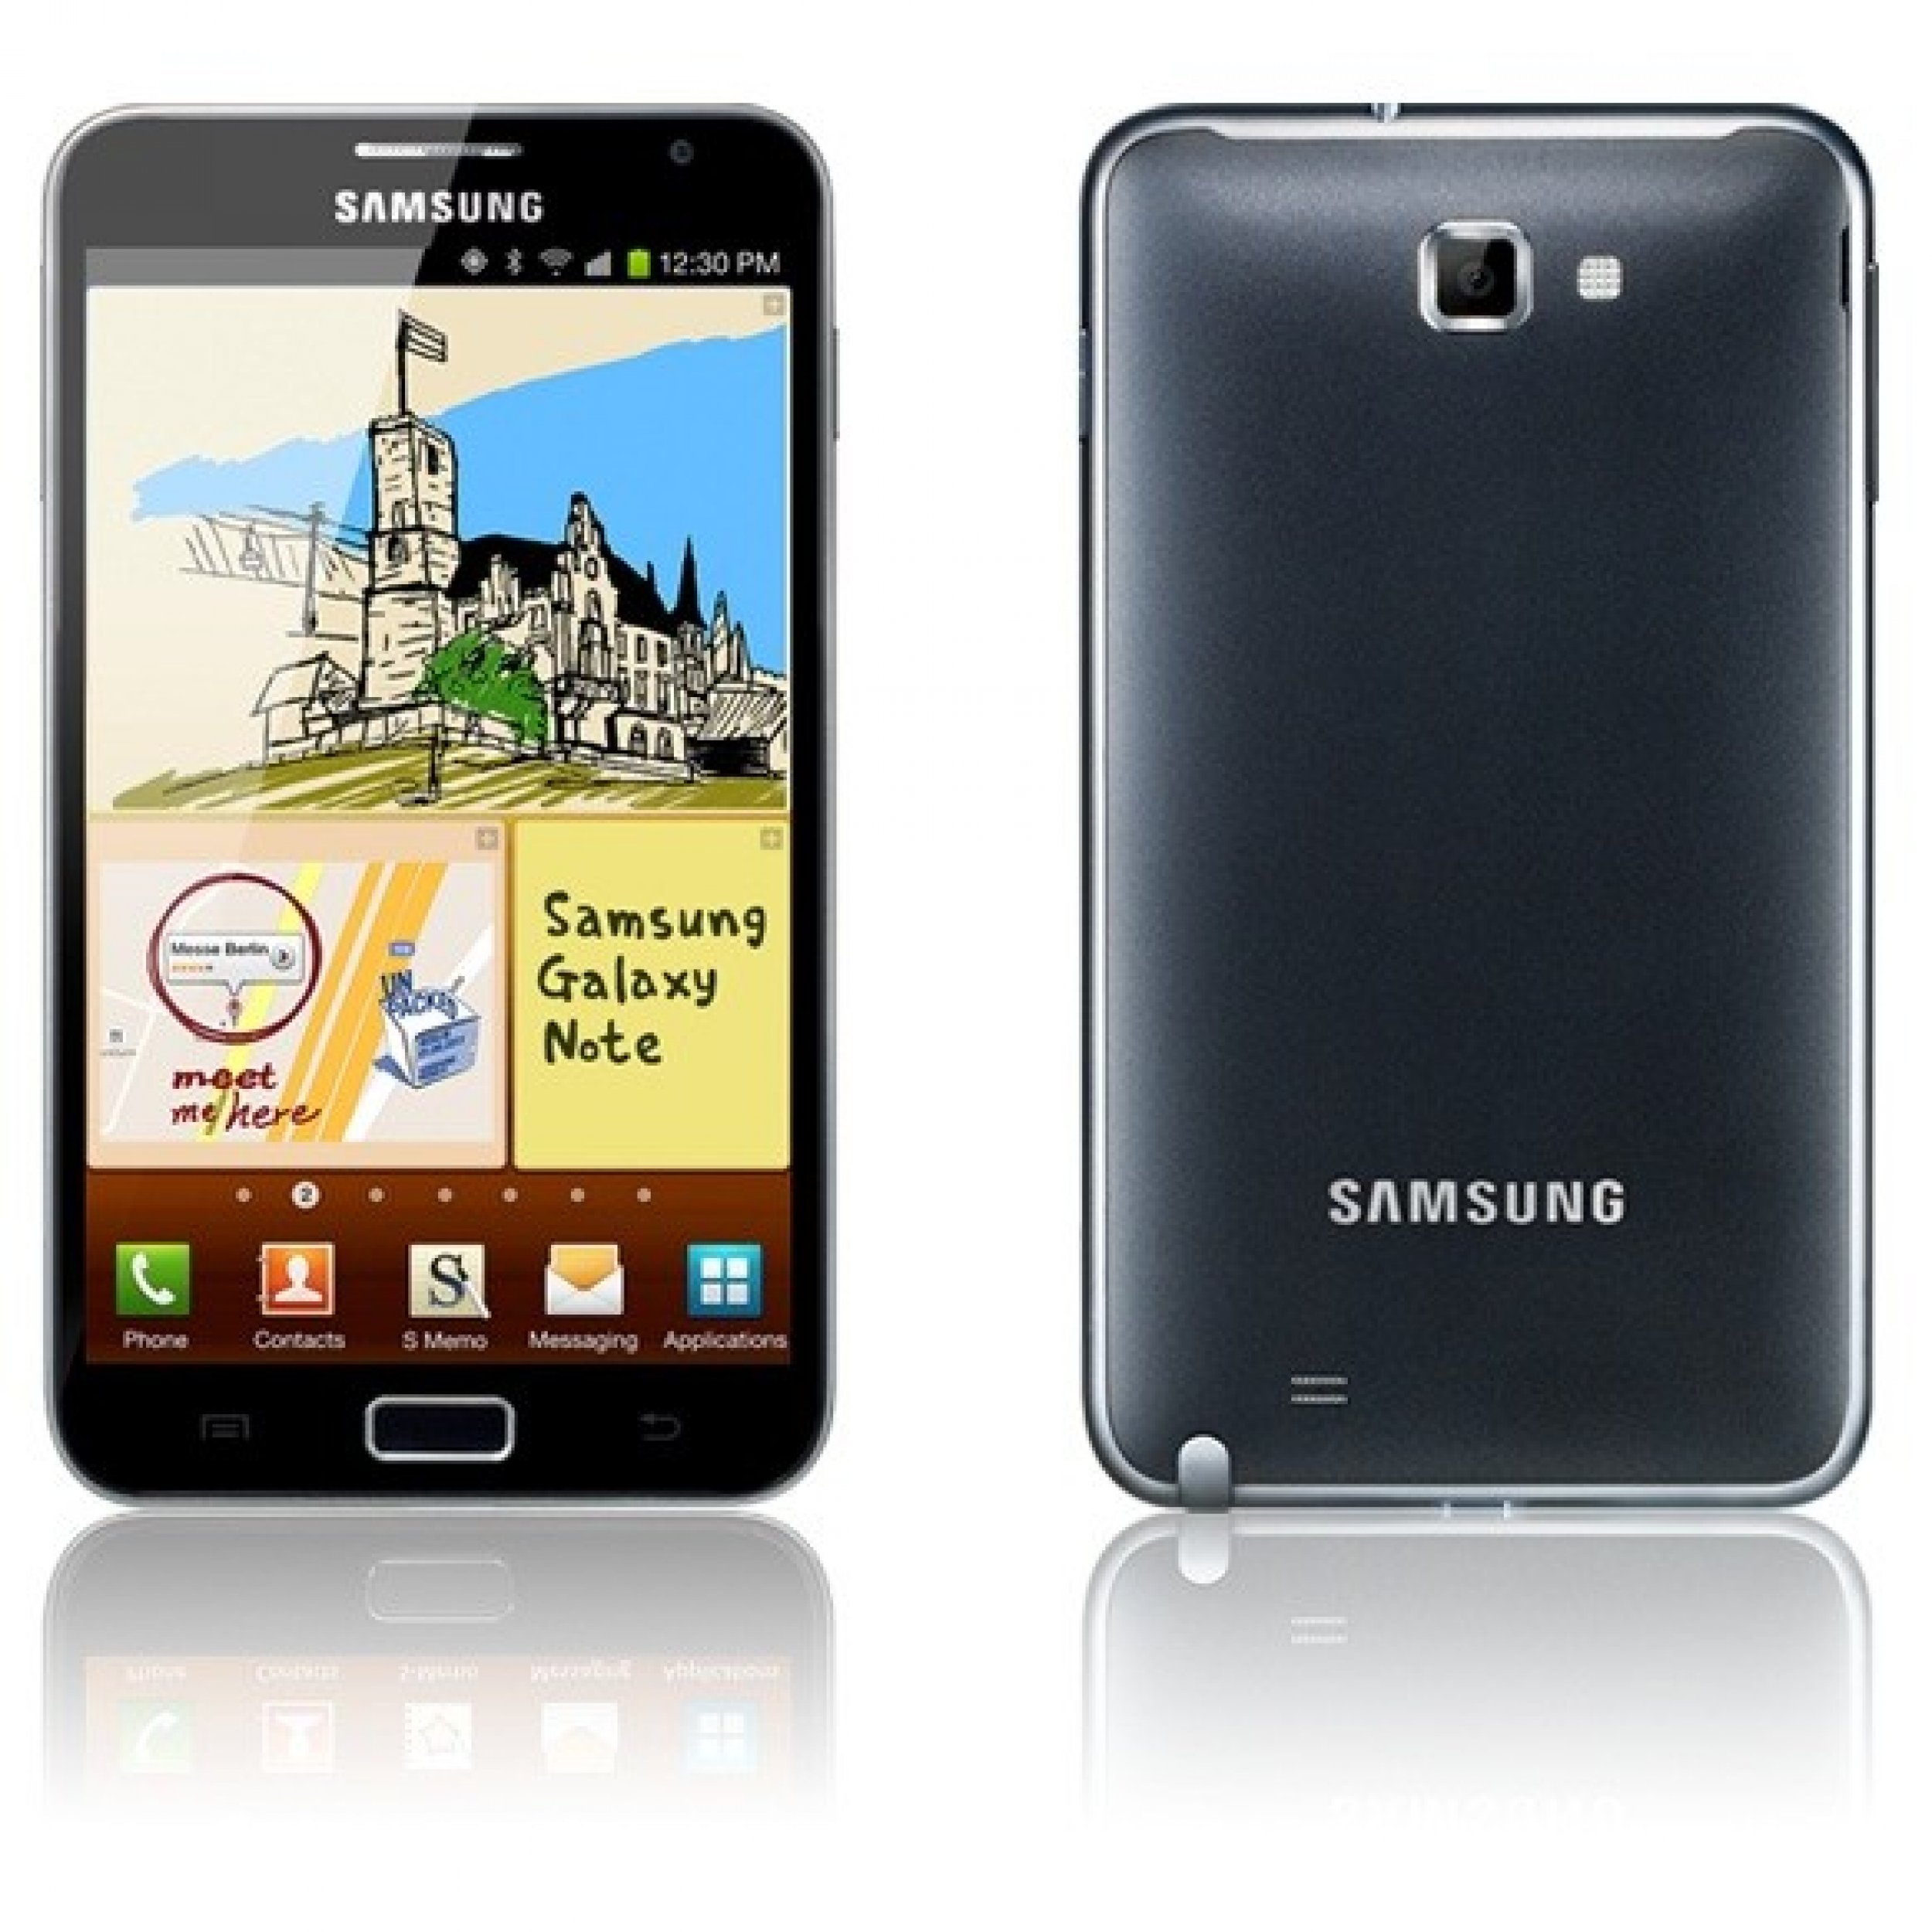 Galaxy Note on the Roll, Says Samsung, 5M Units Shipped So Far